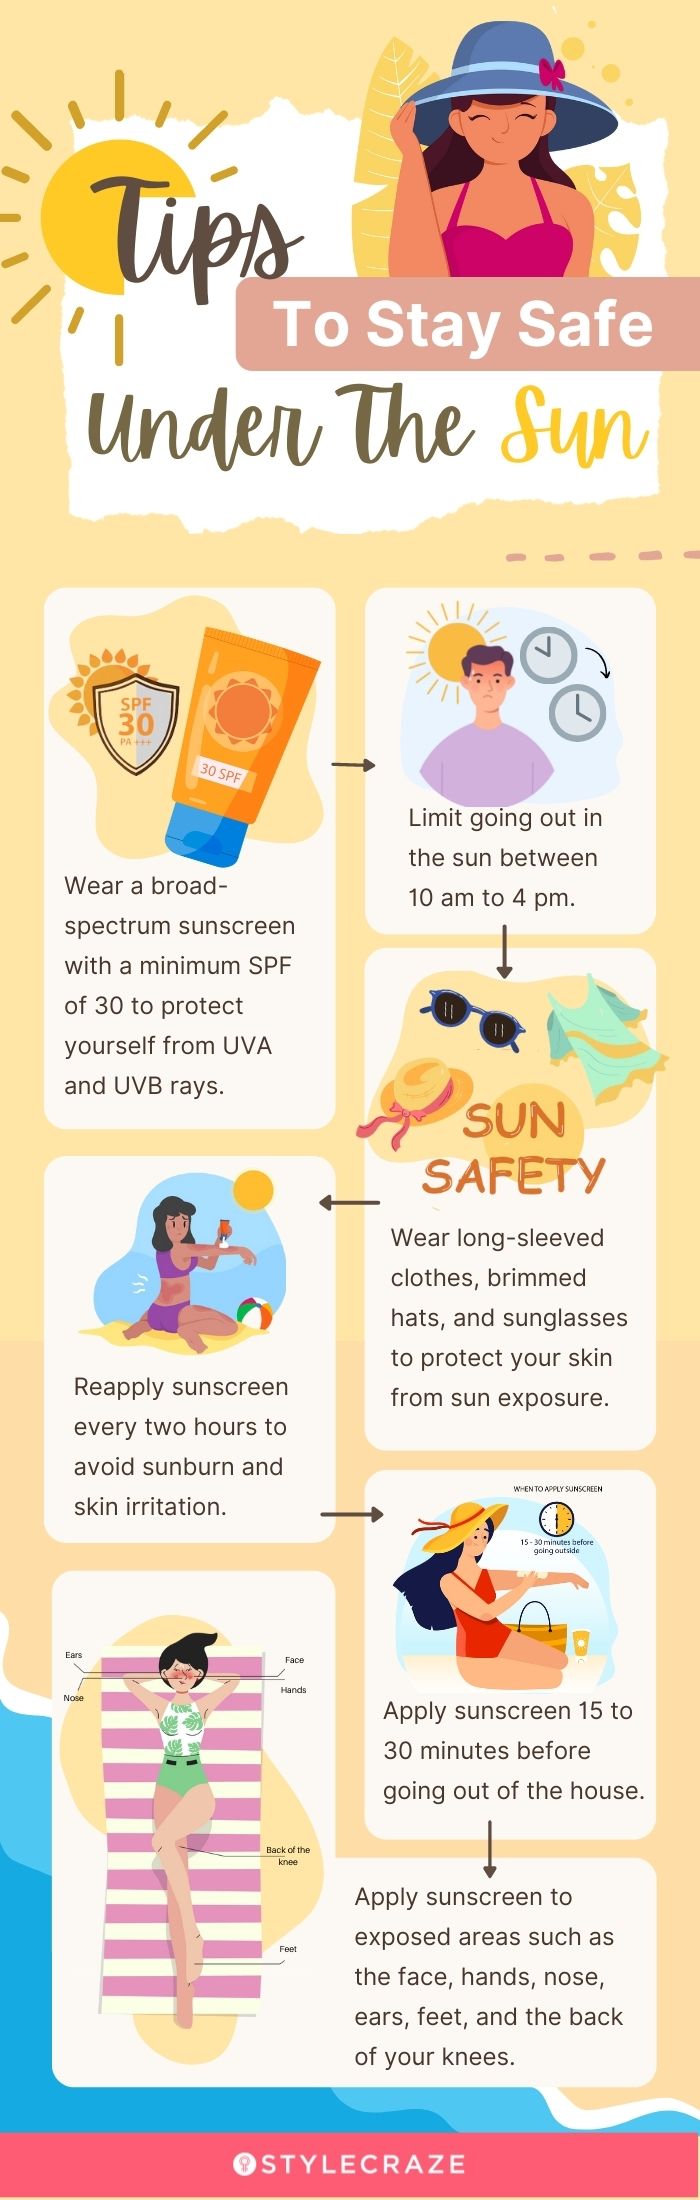 tips to stay safe under the sun (infographic)